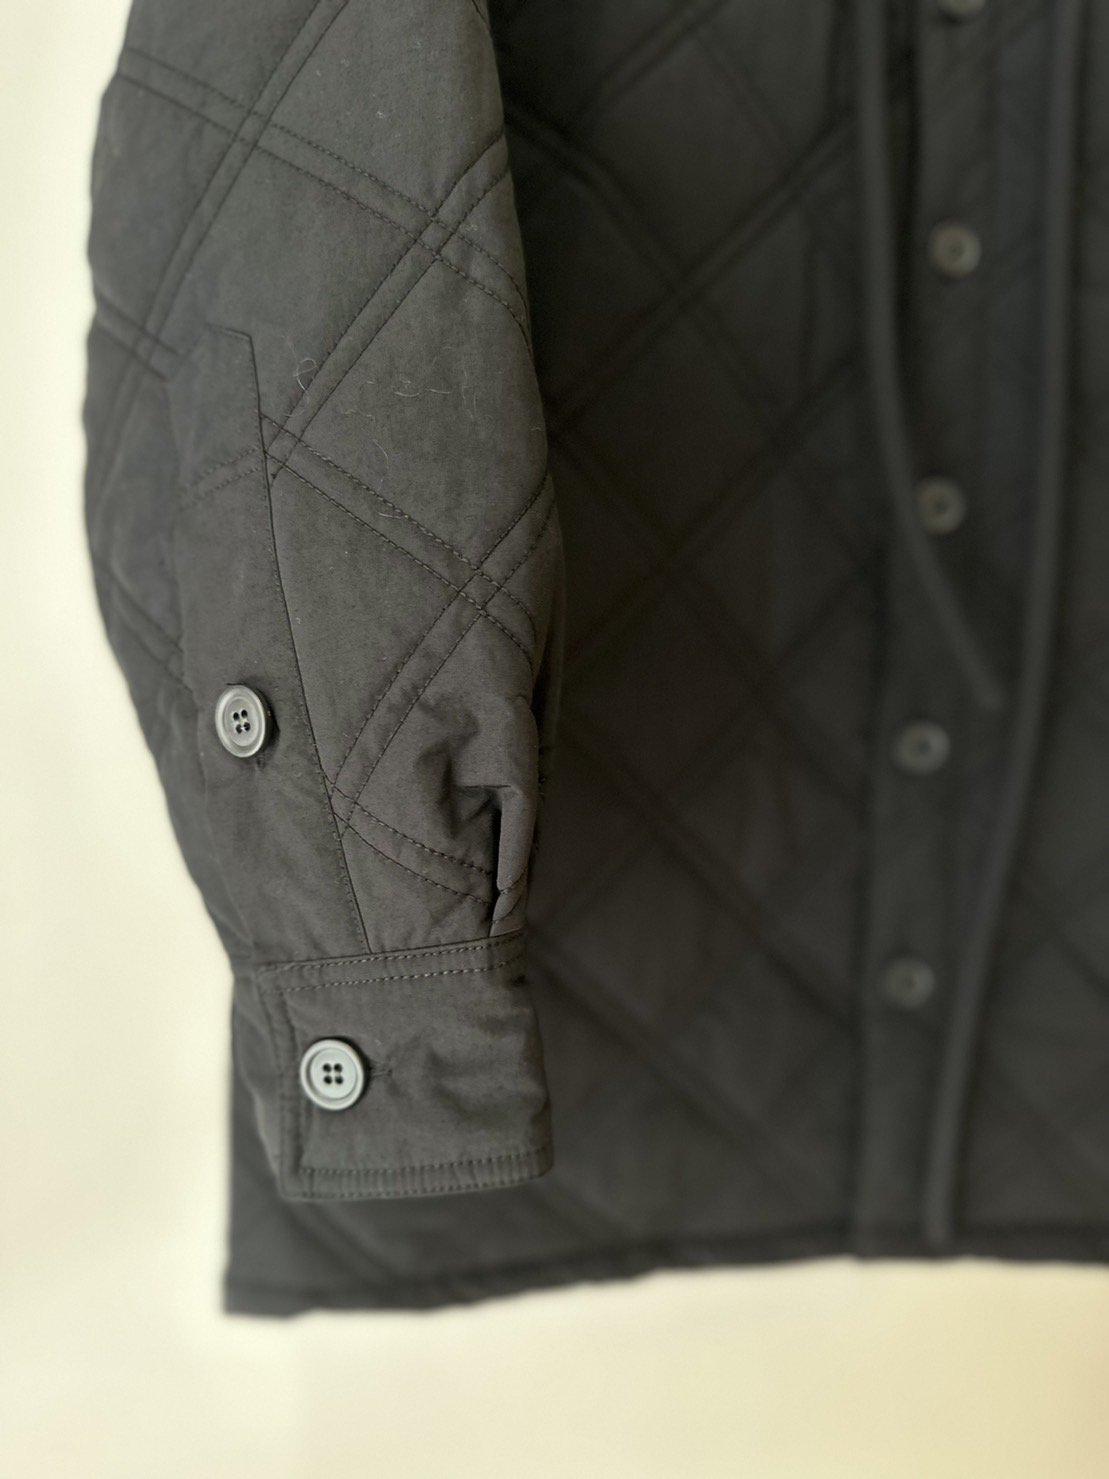 soduk<br />padded jacket / black<img class='new_mark_img2' src='https://img.shop-pro.jp/img/new/icons14.gif' style='border:none;display:inline;margin:0px;padding:0px;width:auto;' />